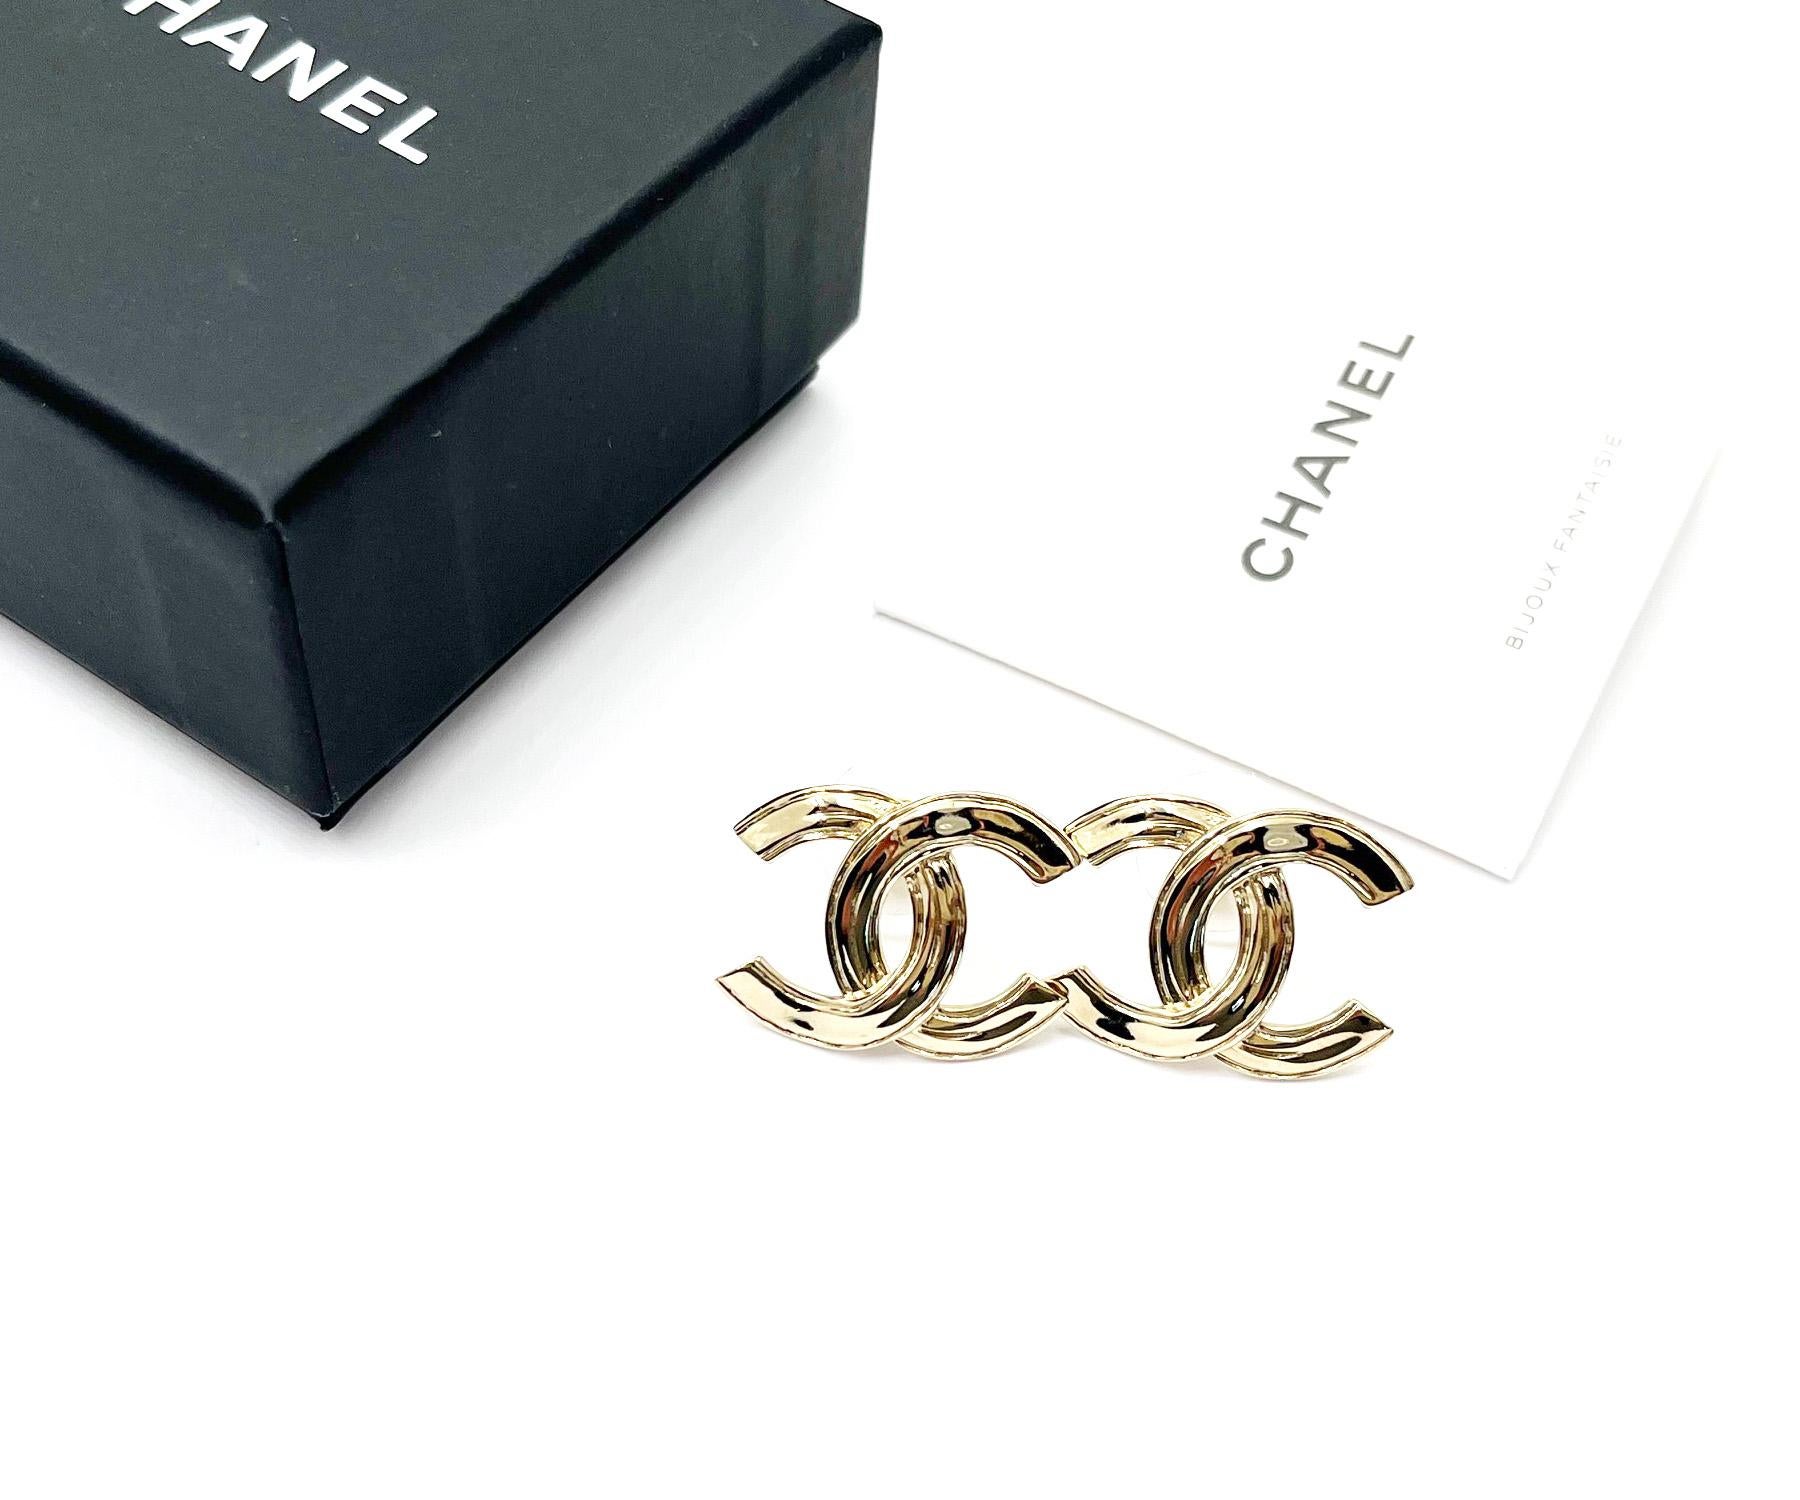 Artisan Chanel Brand New Light Gold Textured CC Large Piercing Earrings For Sale